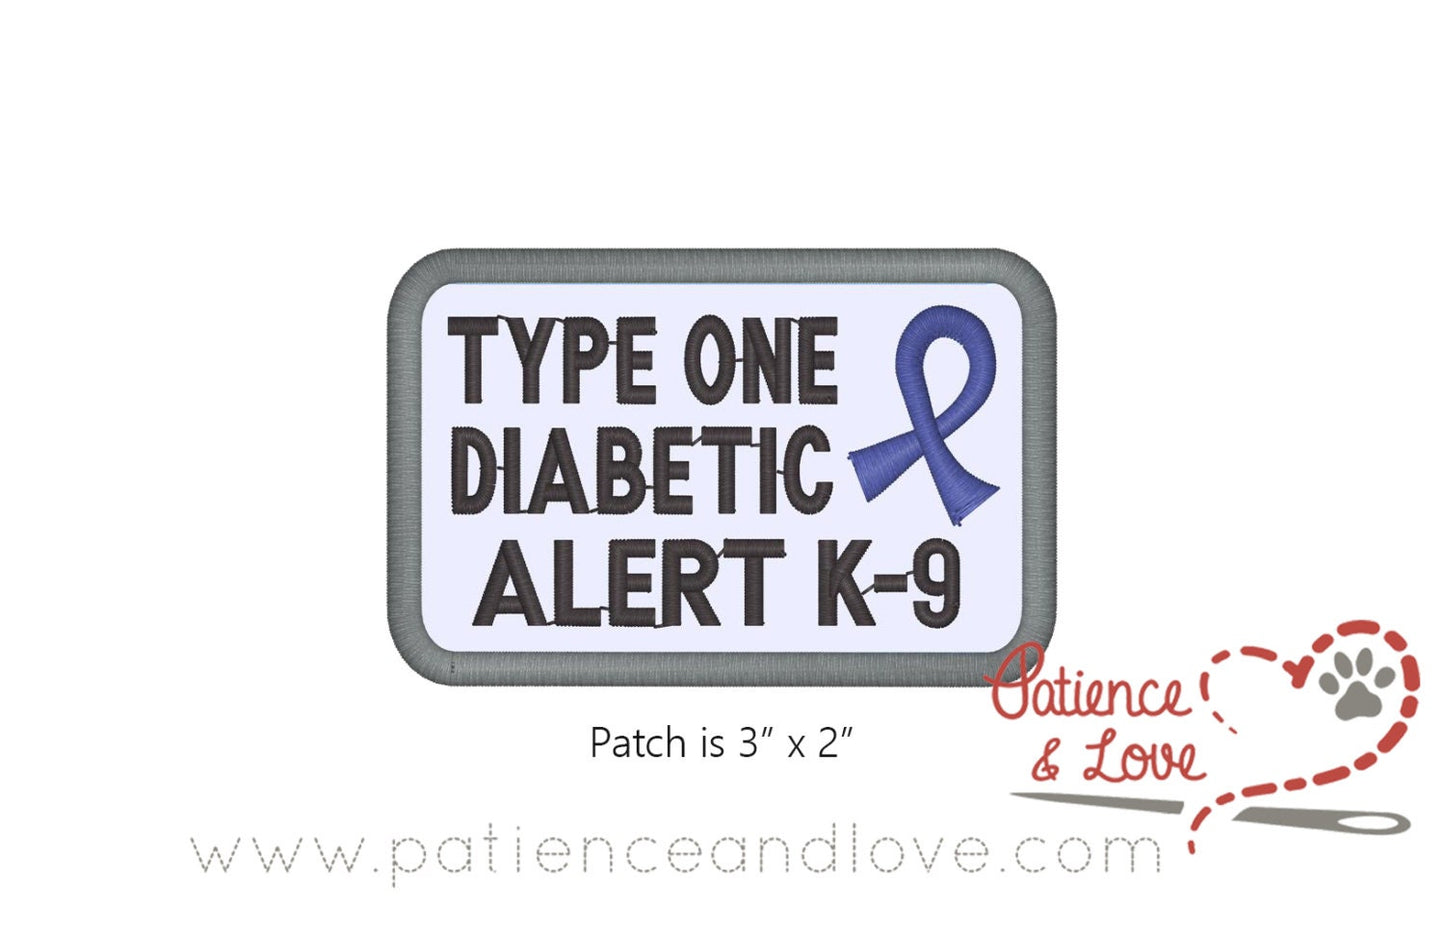 Type 1 Diabetic Alert K-9, with ribbon, 3 inch x 2 inch rectangle patch